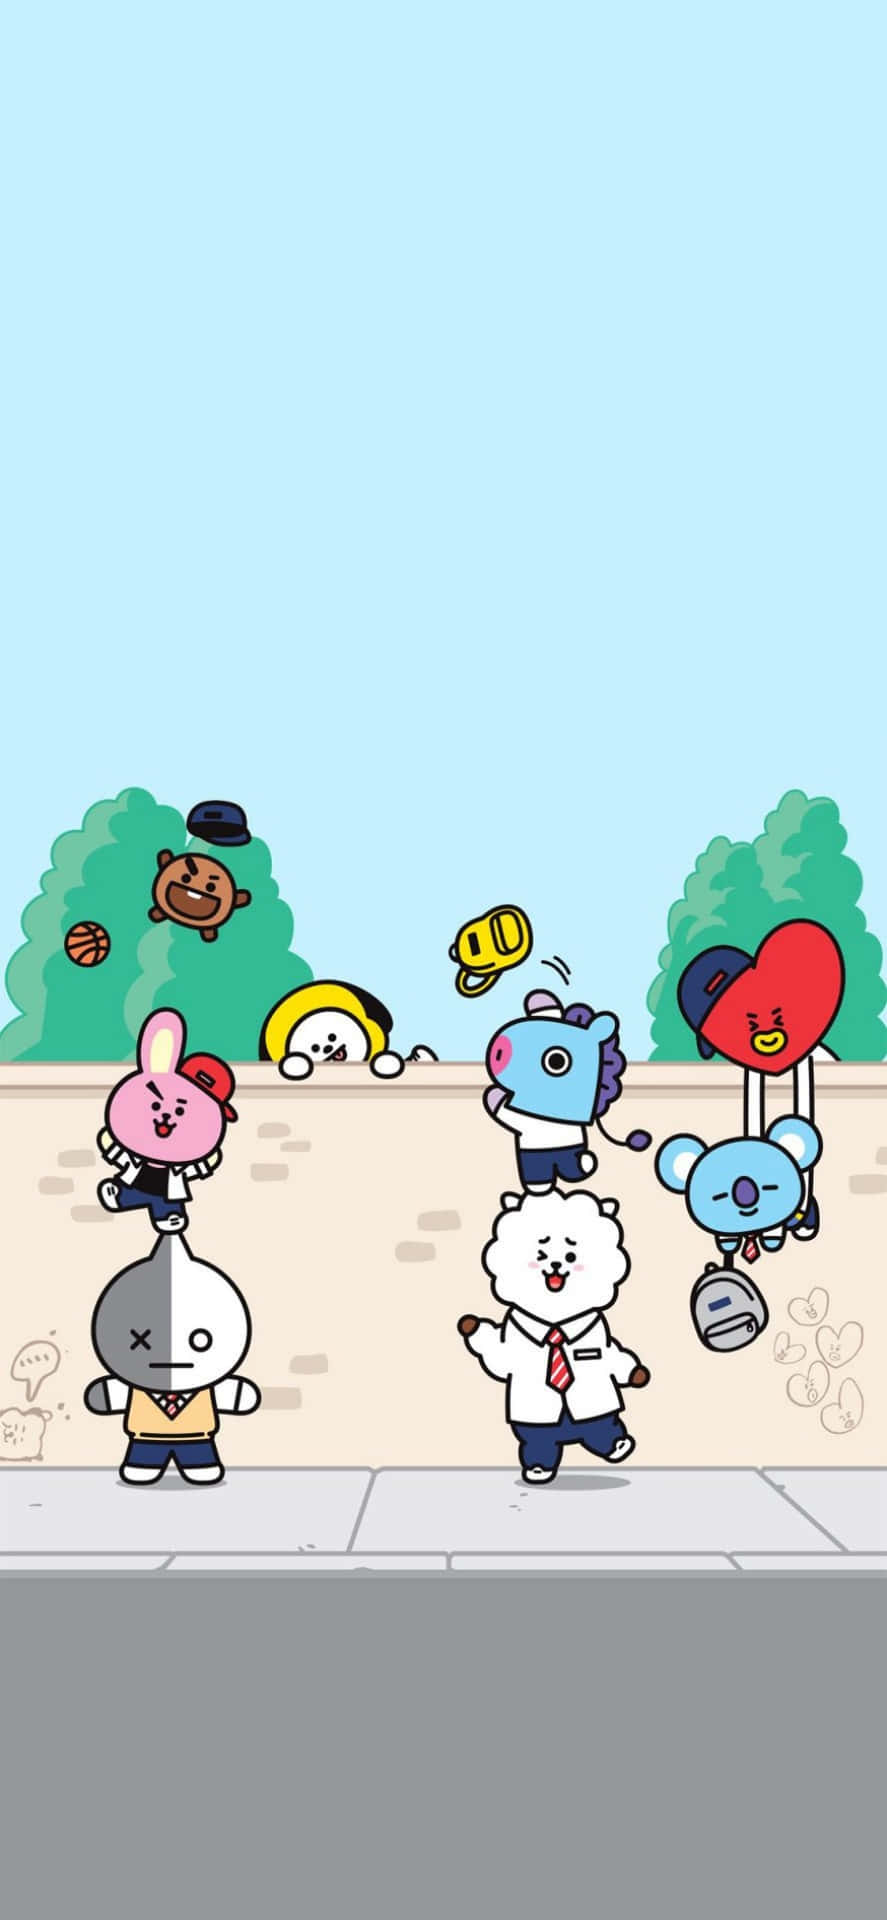 Experience the World of Imagination with BT21